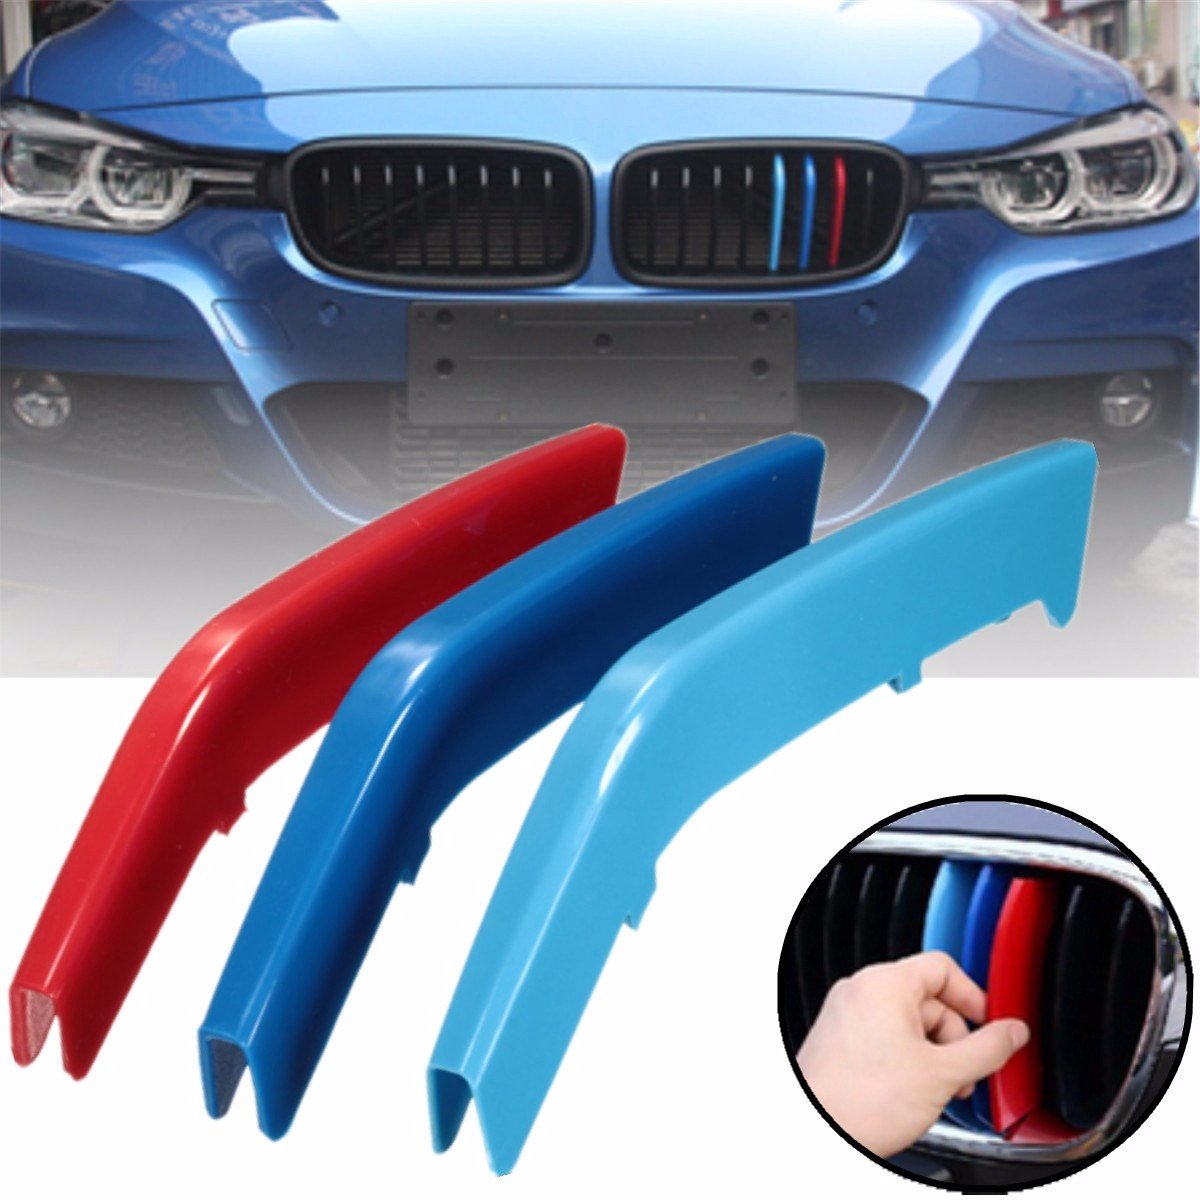 3pcs-set-M-Color-ABS-Kidney-Grill-Bar-Grille-Covers-Decal-Strip-Clip-For-BMW-3.jpg